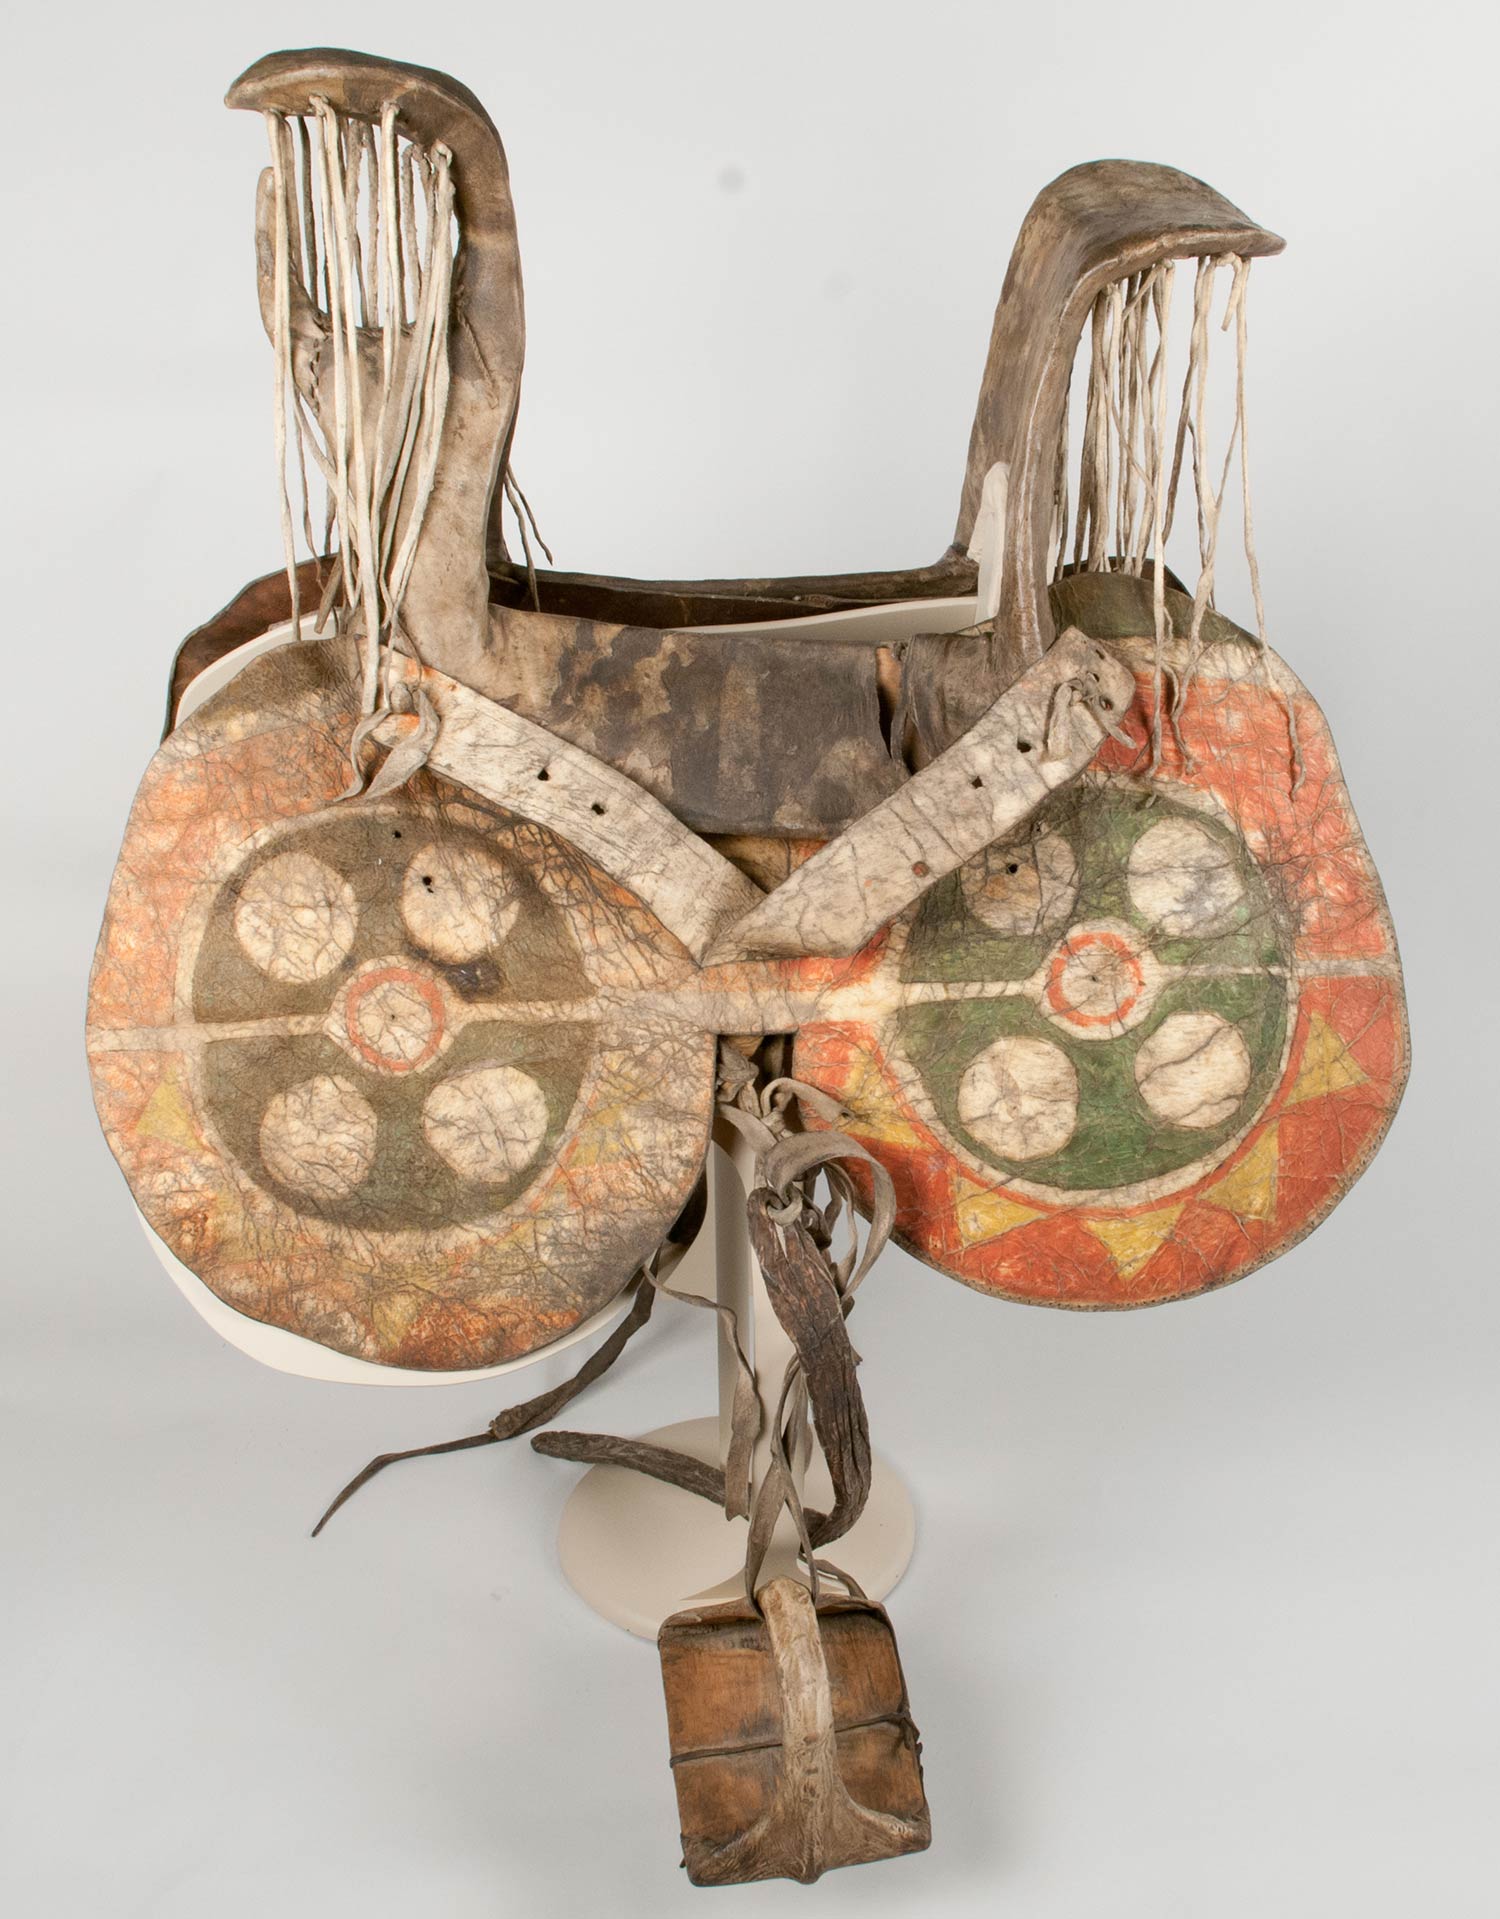 A woman's saddle made from a cottonwood frame with a rawhide covering. The rawhide saddle fenders features geometric designs of green, yellow, and red.